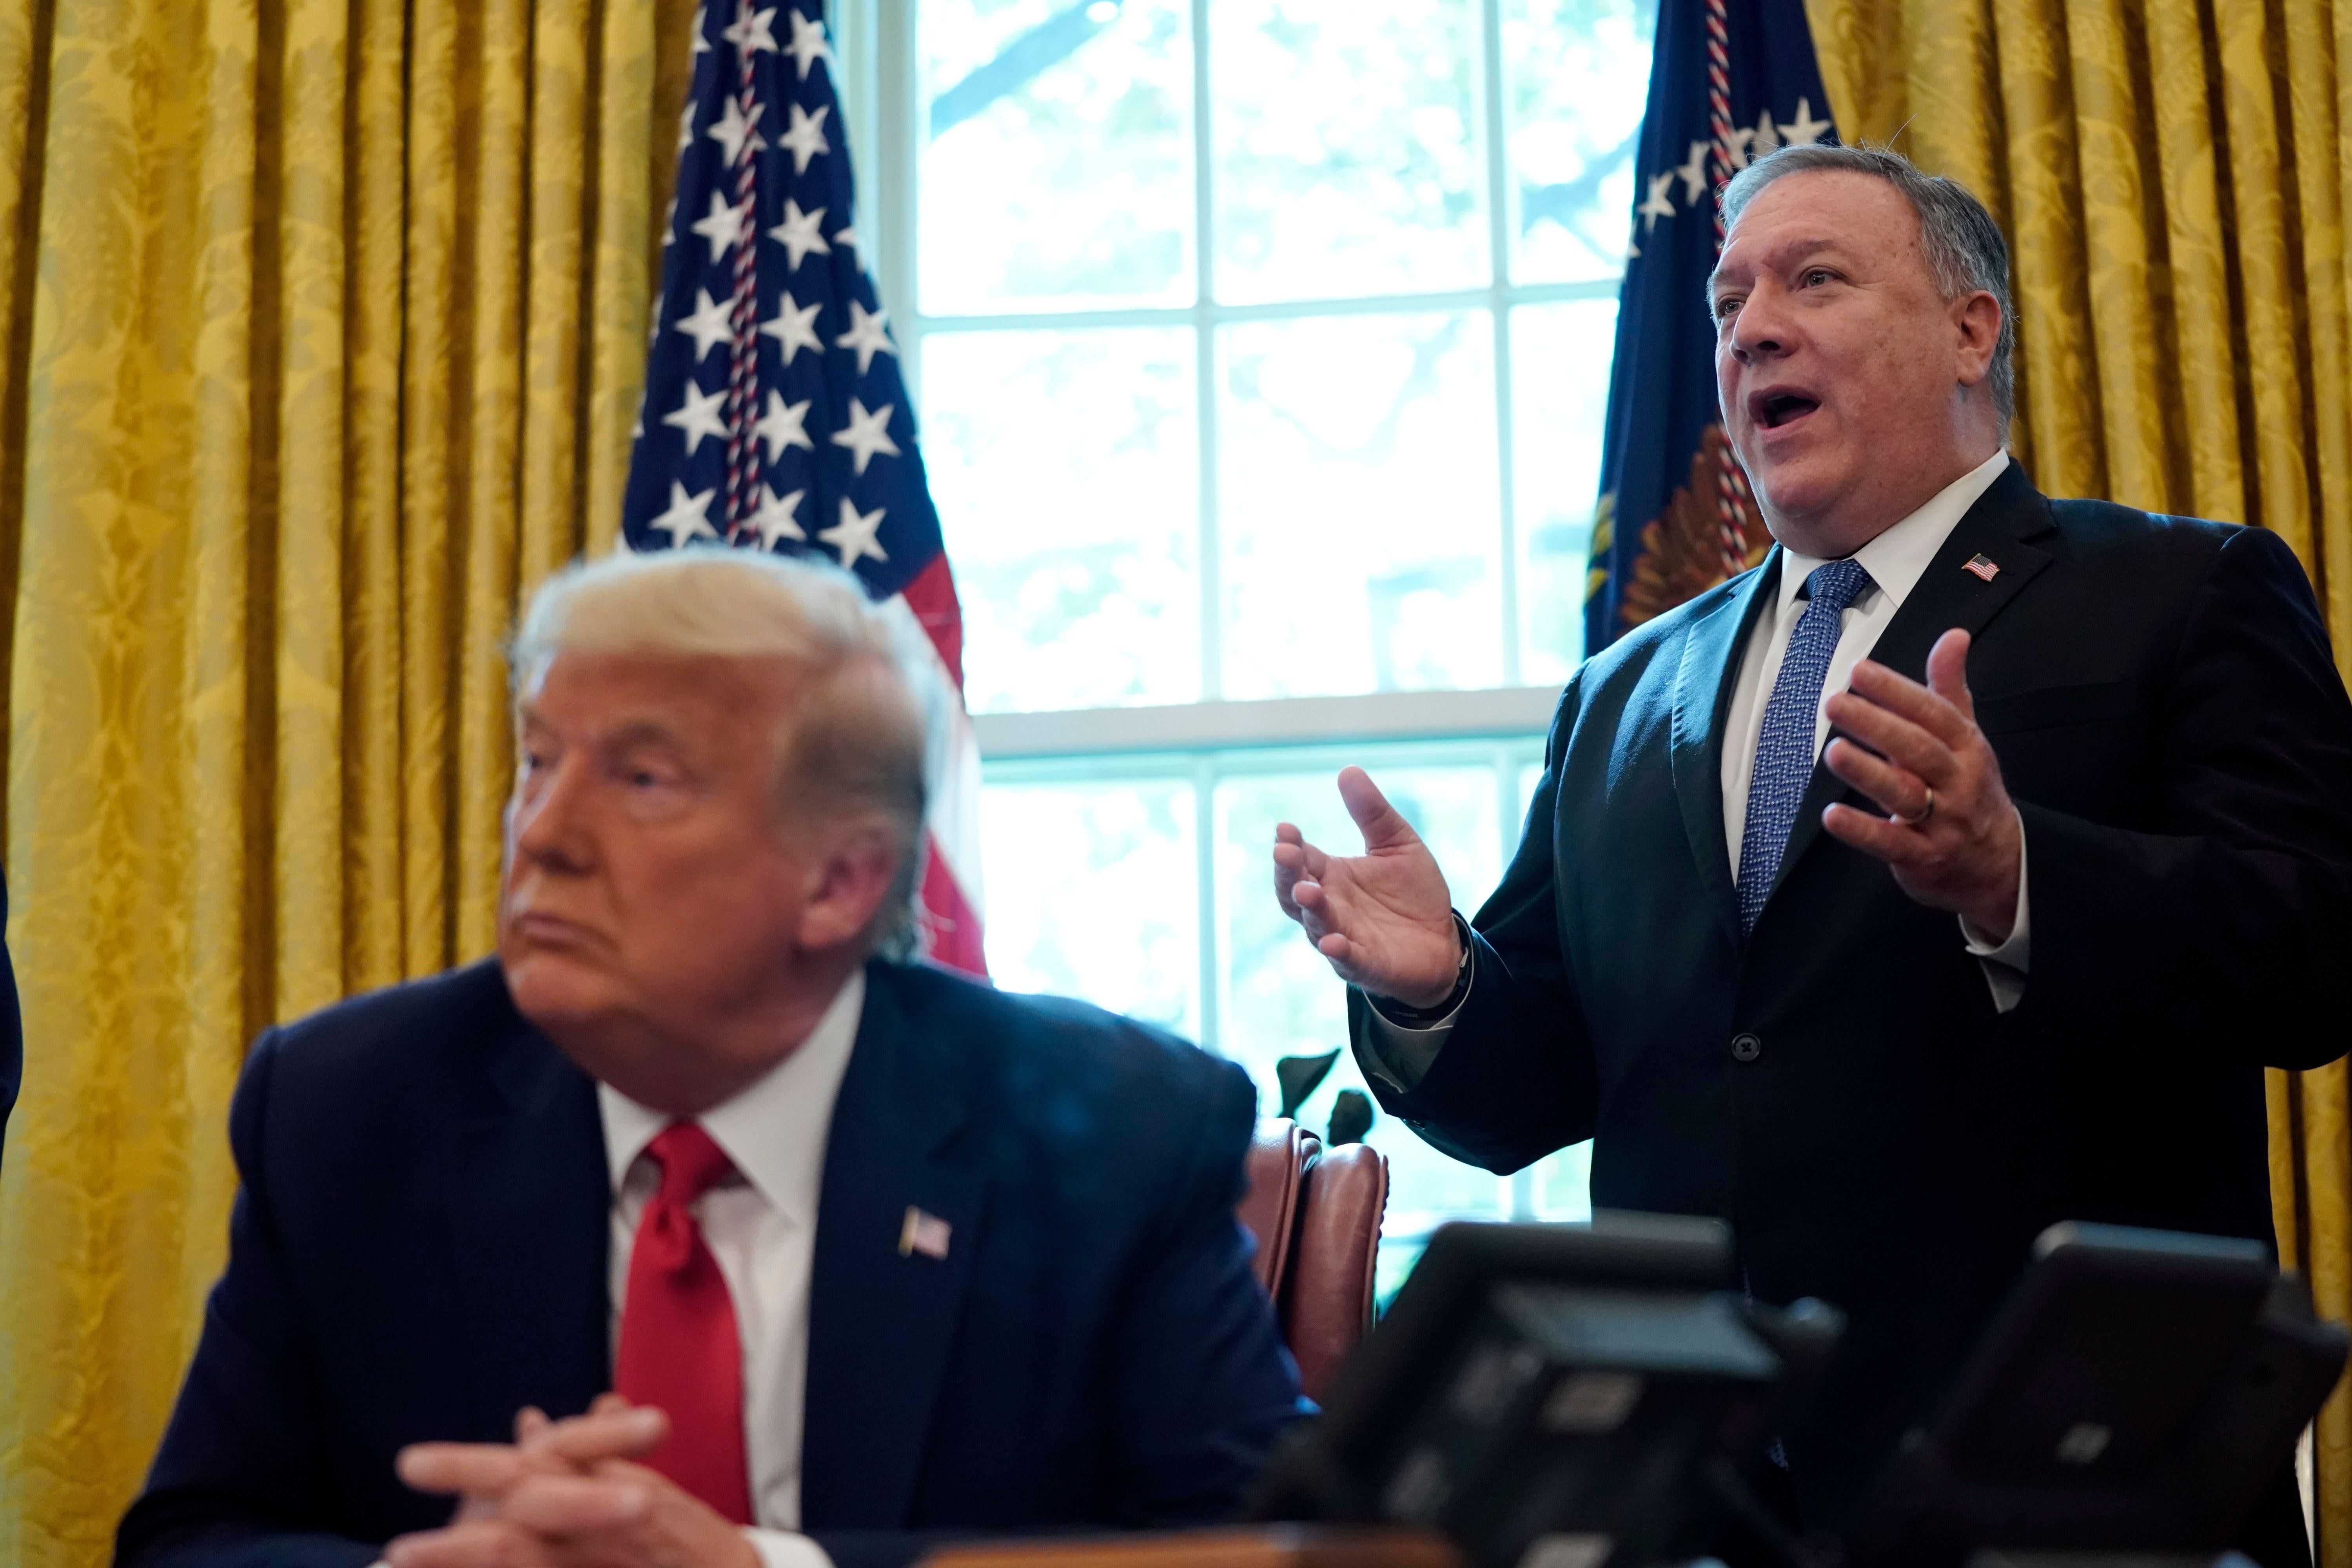 Mike Pompeo stands behind President Trump who's seated in the Oval Office.